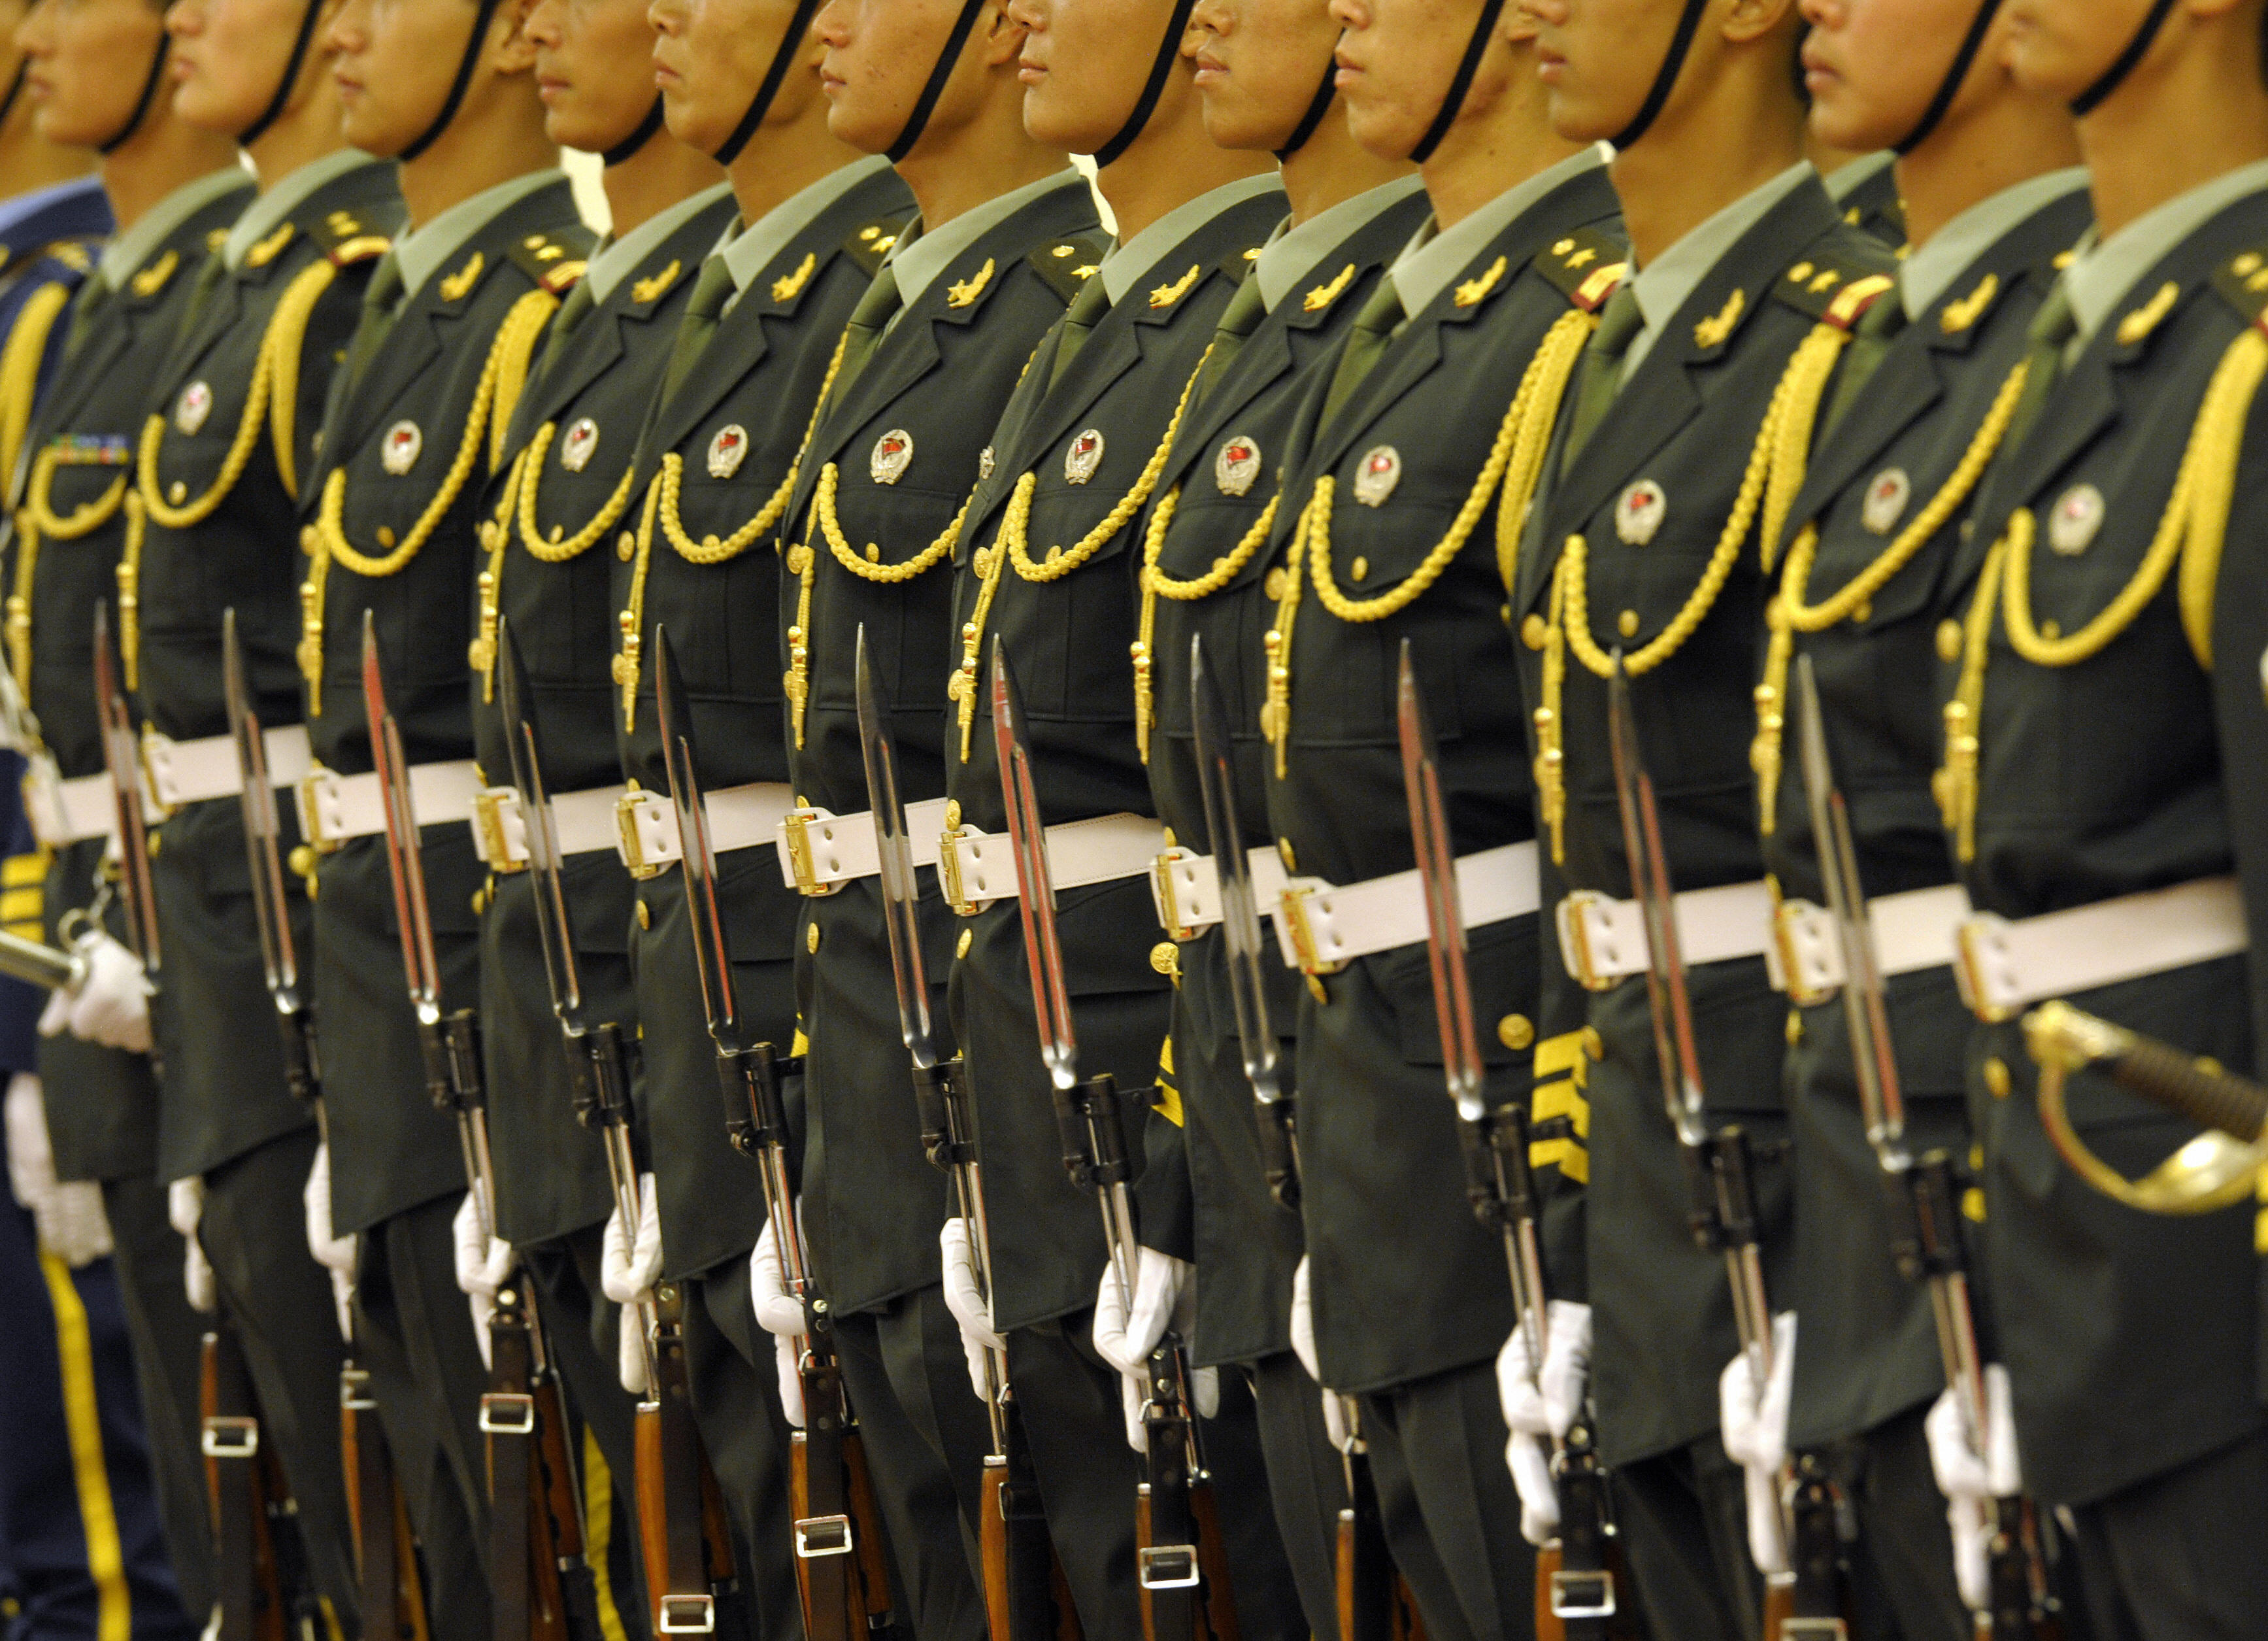 Chinese People's Liberation Army's honor guards line up during a welcome ceremony for Turkish President Abdullah Gul at the Great Hall of the People in Beijing on June 25, 2009. (Liu Jin—AFP/Getty Images)